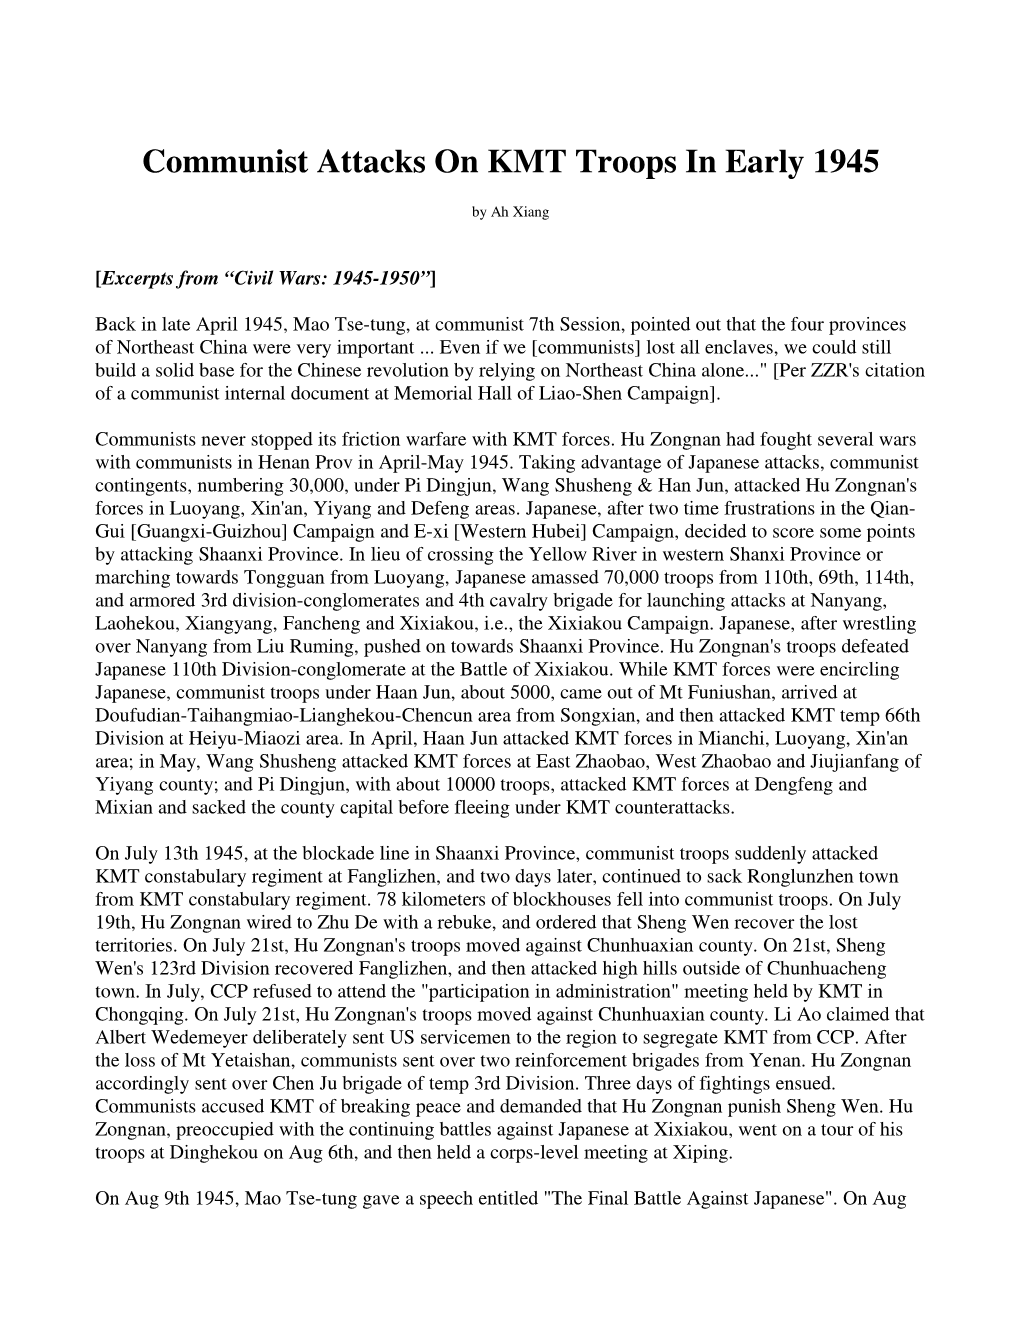 Communist Attacks on KMT Troops in Early 1945